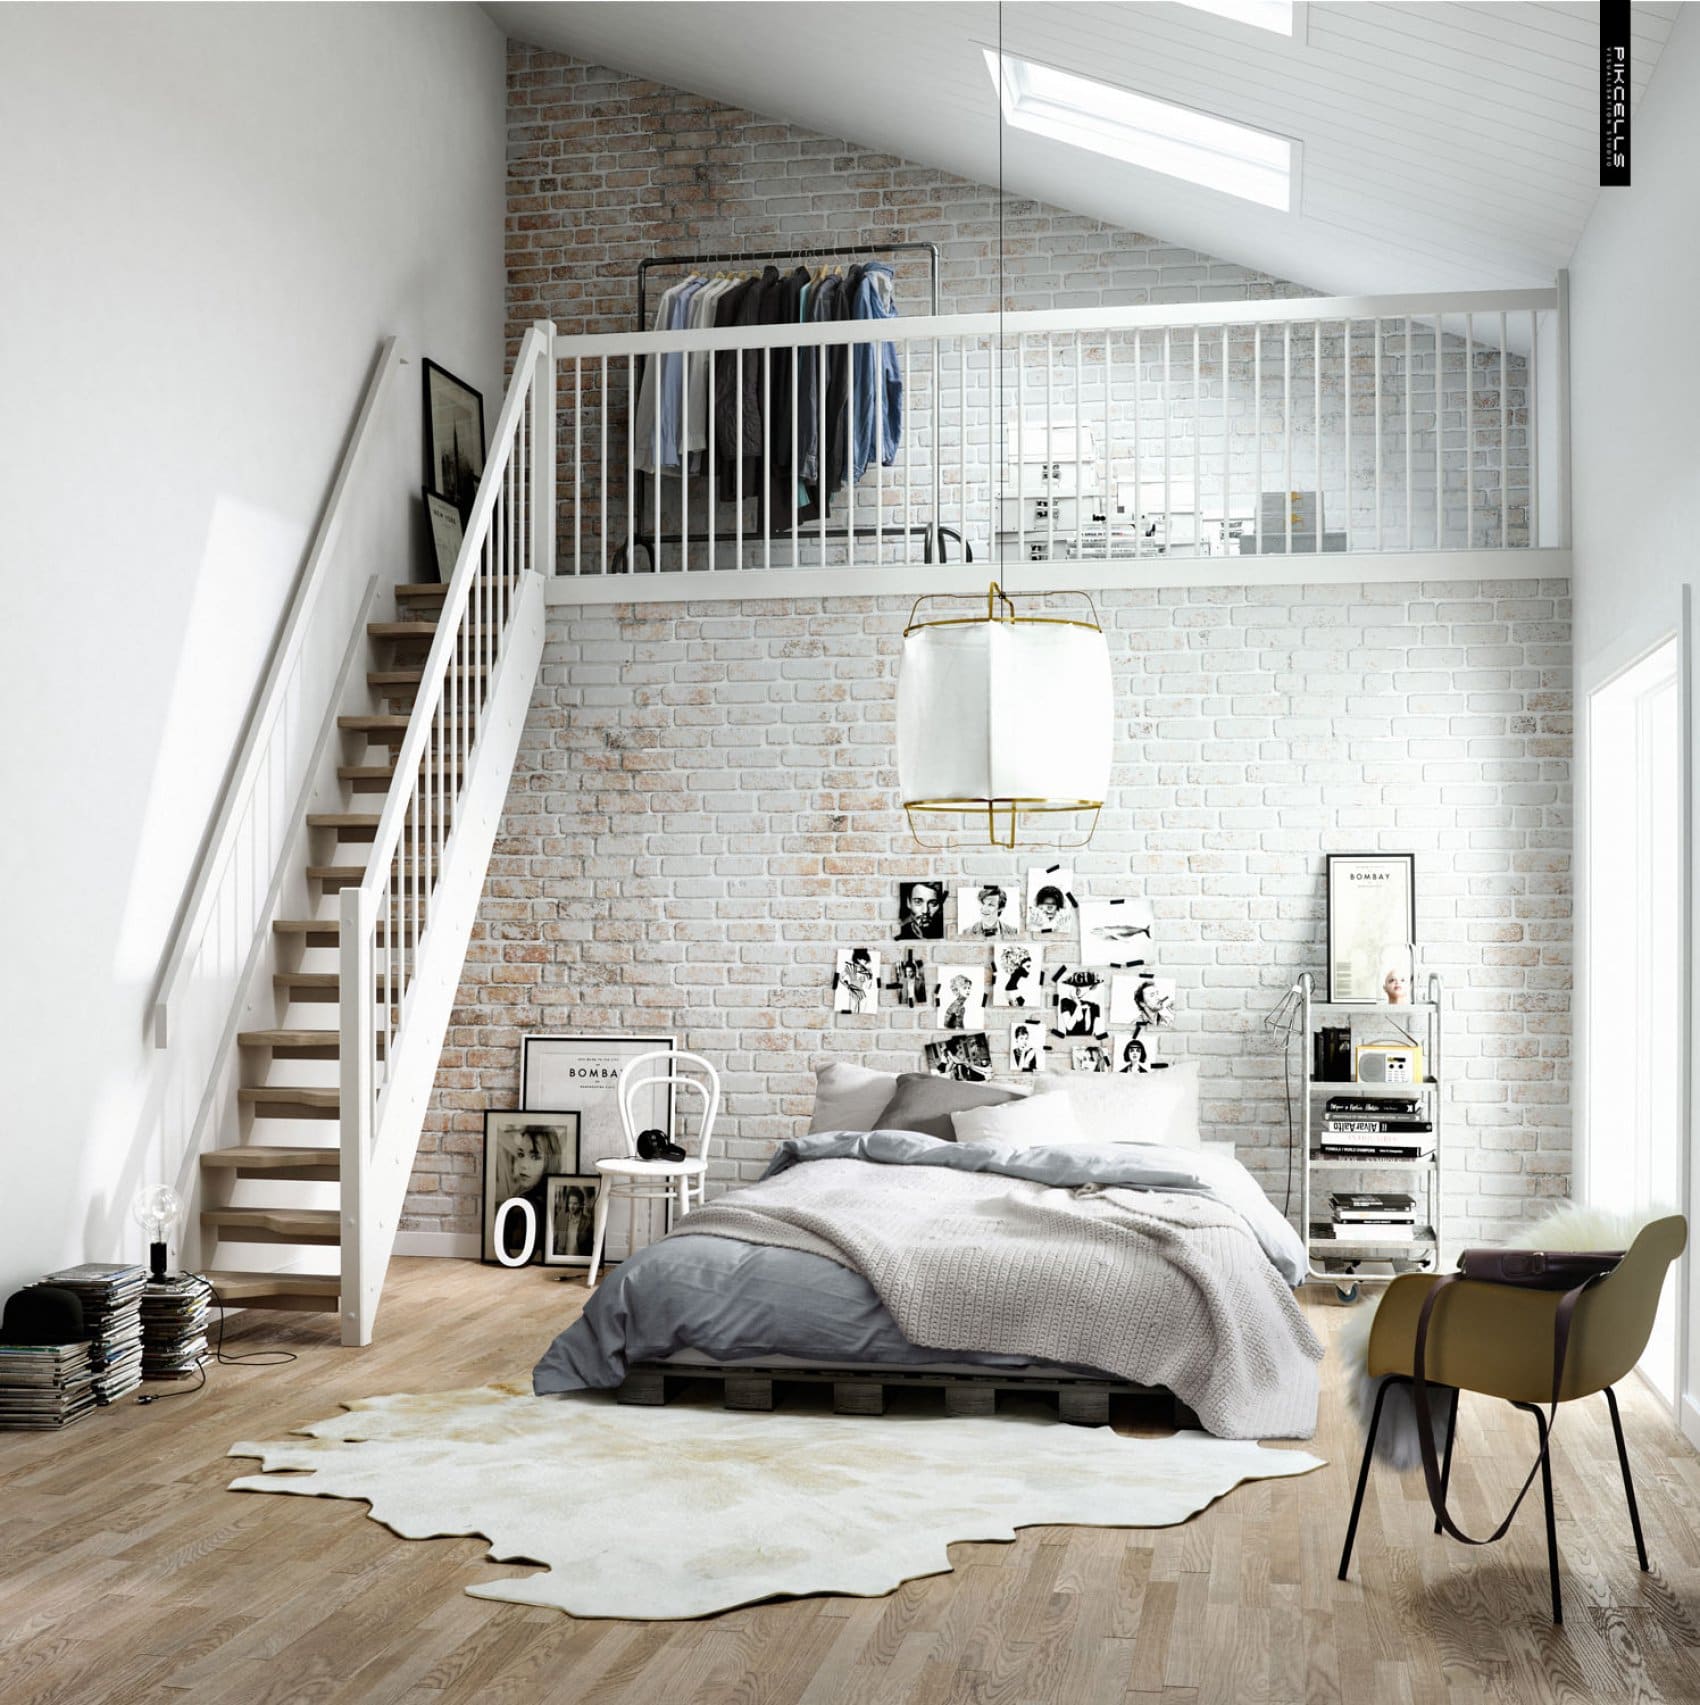 airy and fresh Scandinavian bedroom with upstairs closet. by Pikcells Visualisation Studio